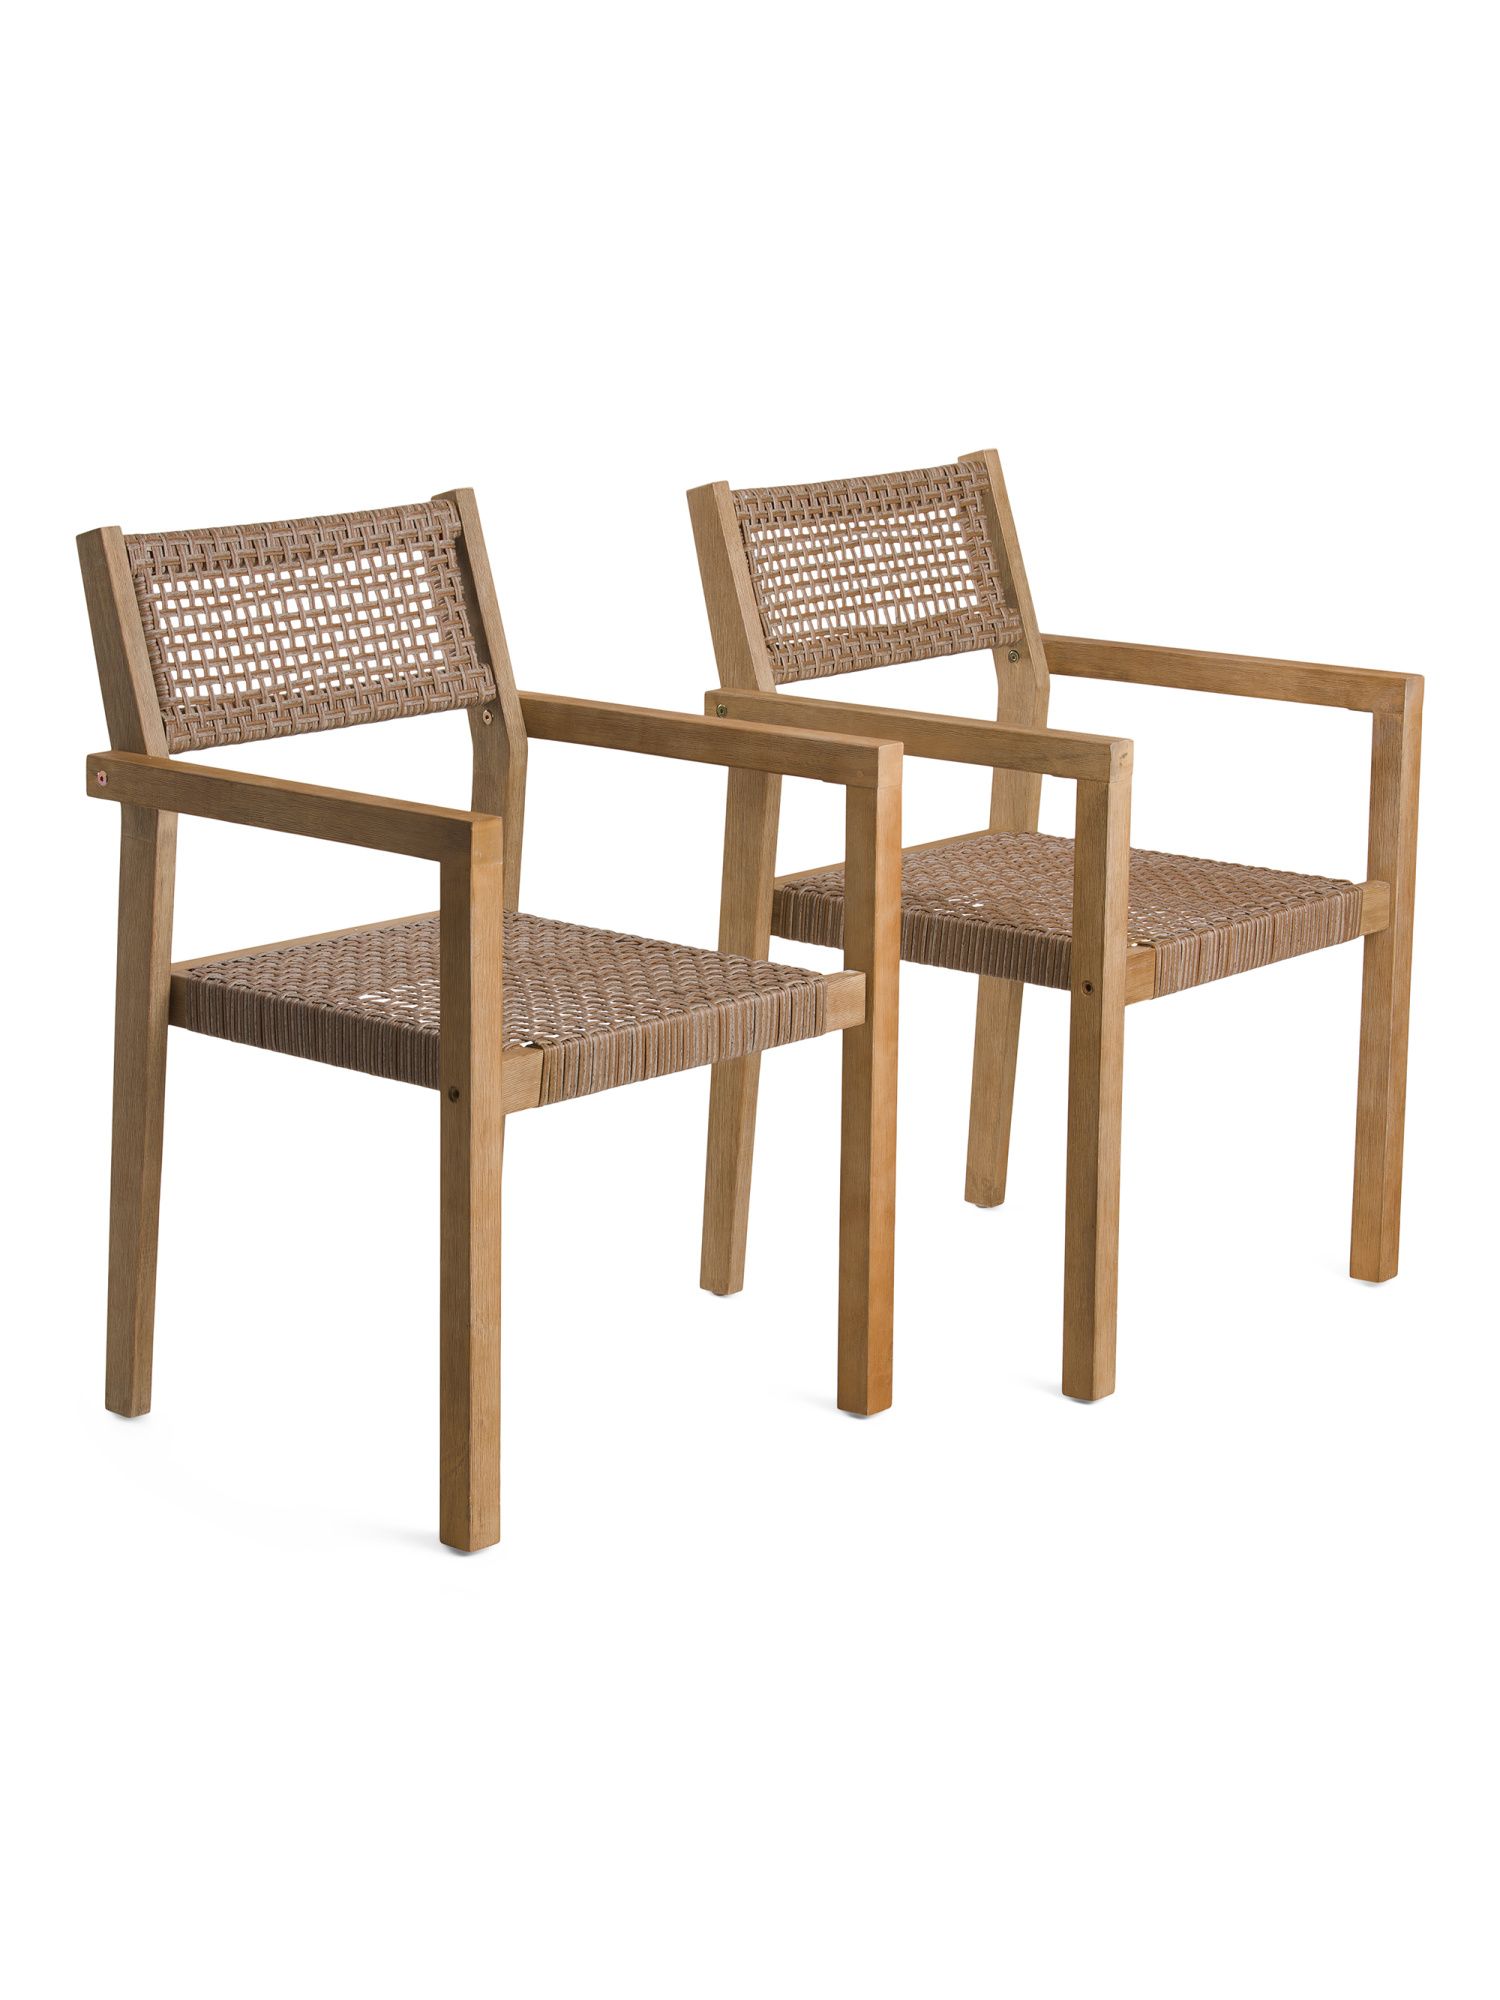 Set Of 2 Outdoor Dining Chairs | The Global Decor Shop | Marshalls | Marshalls